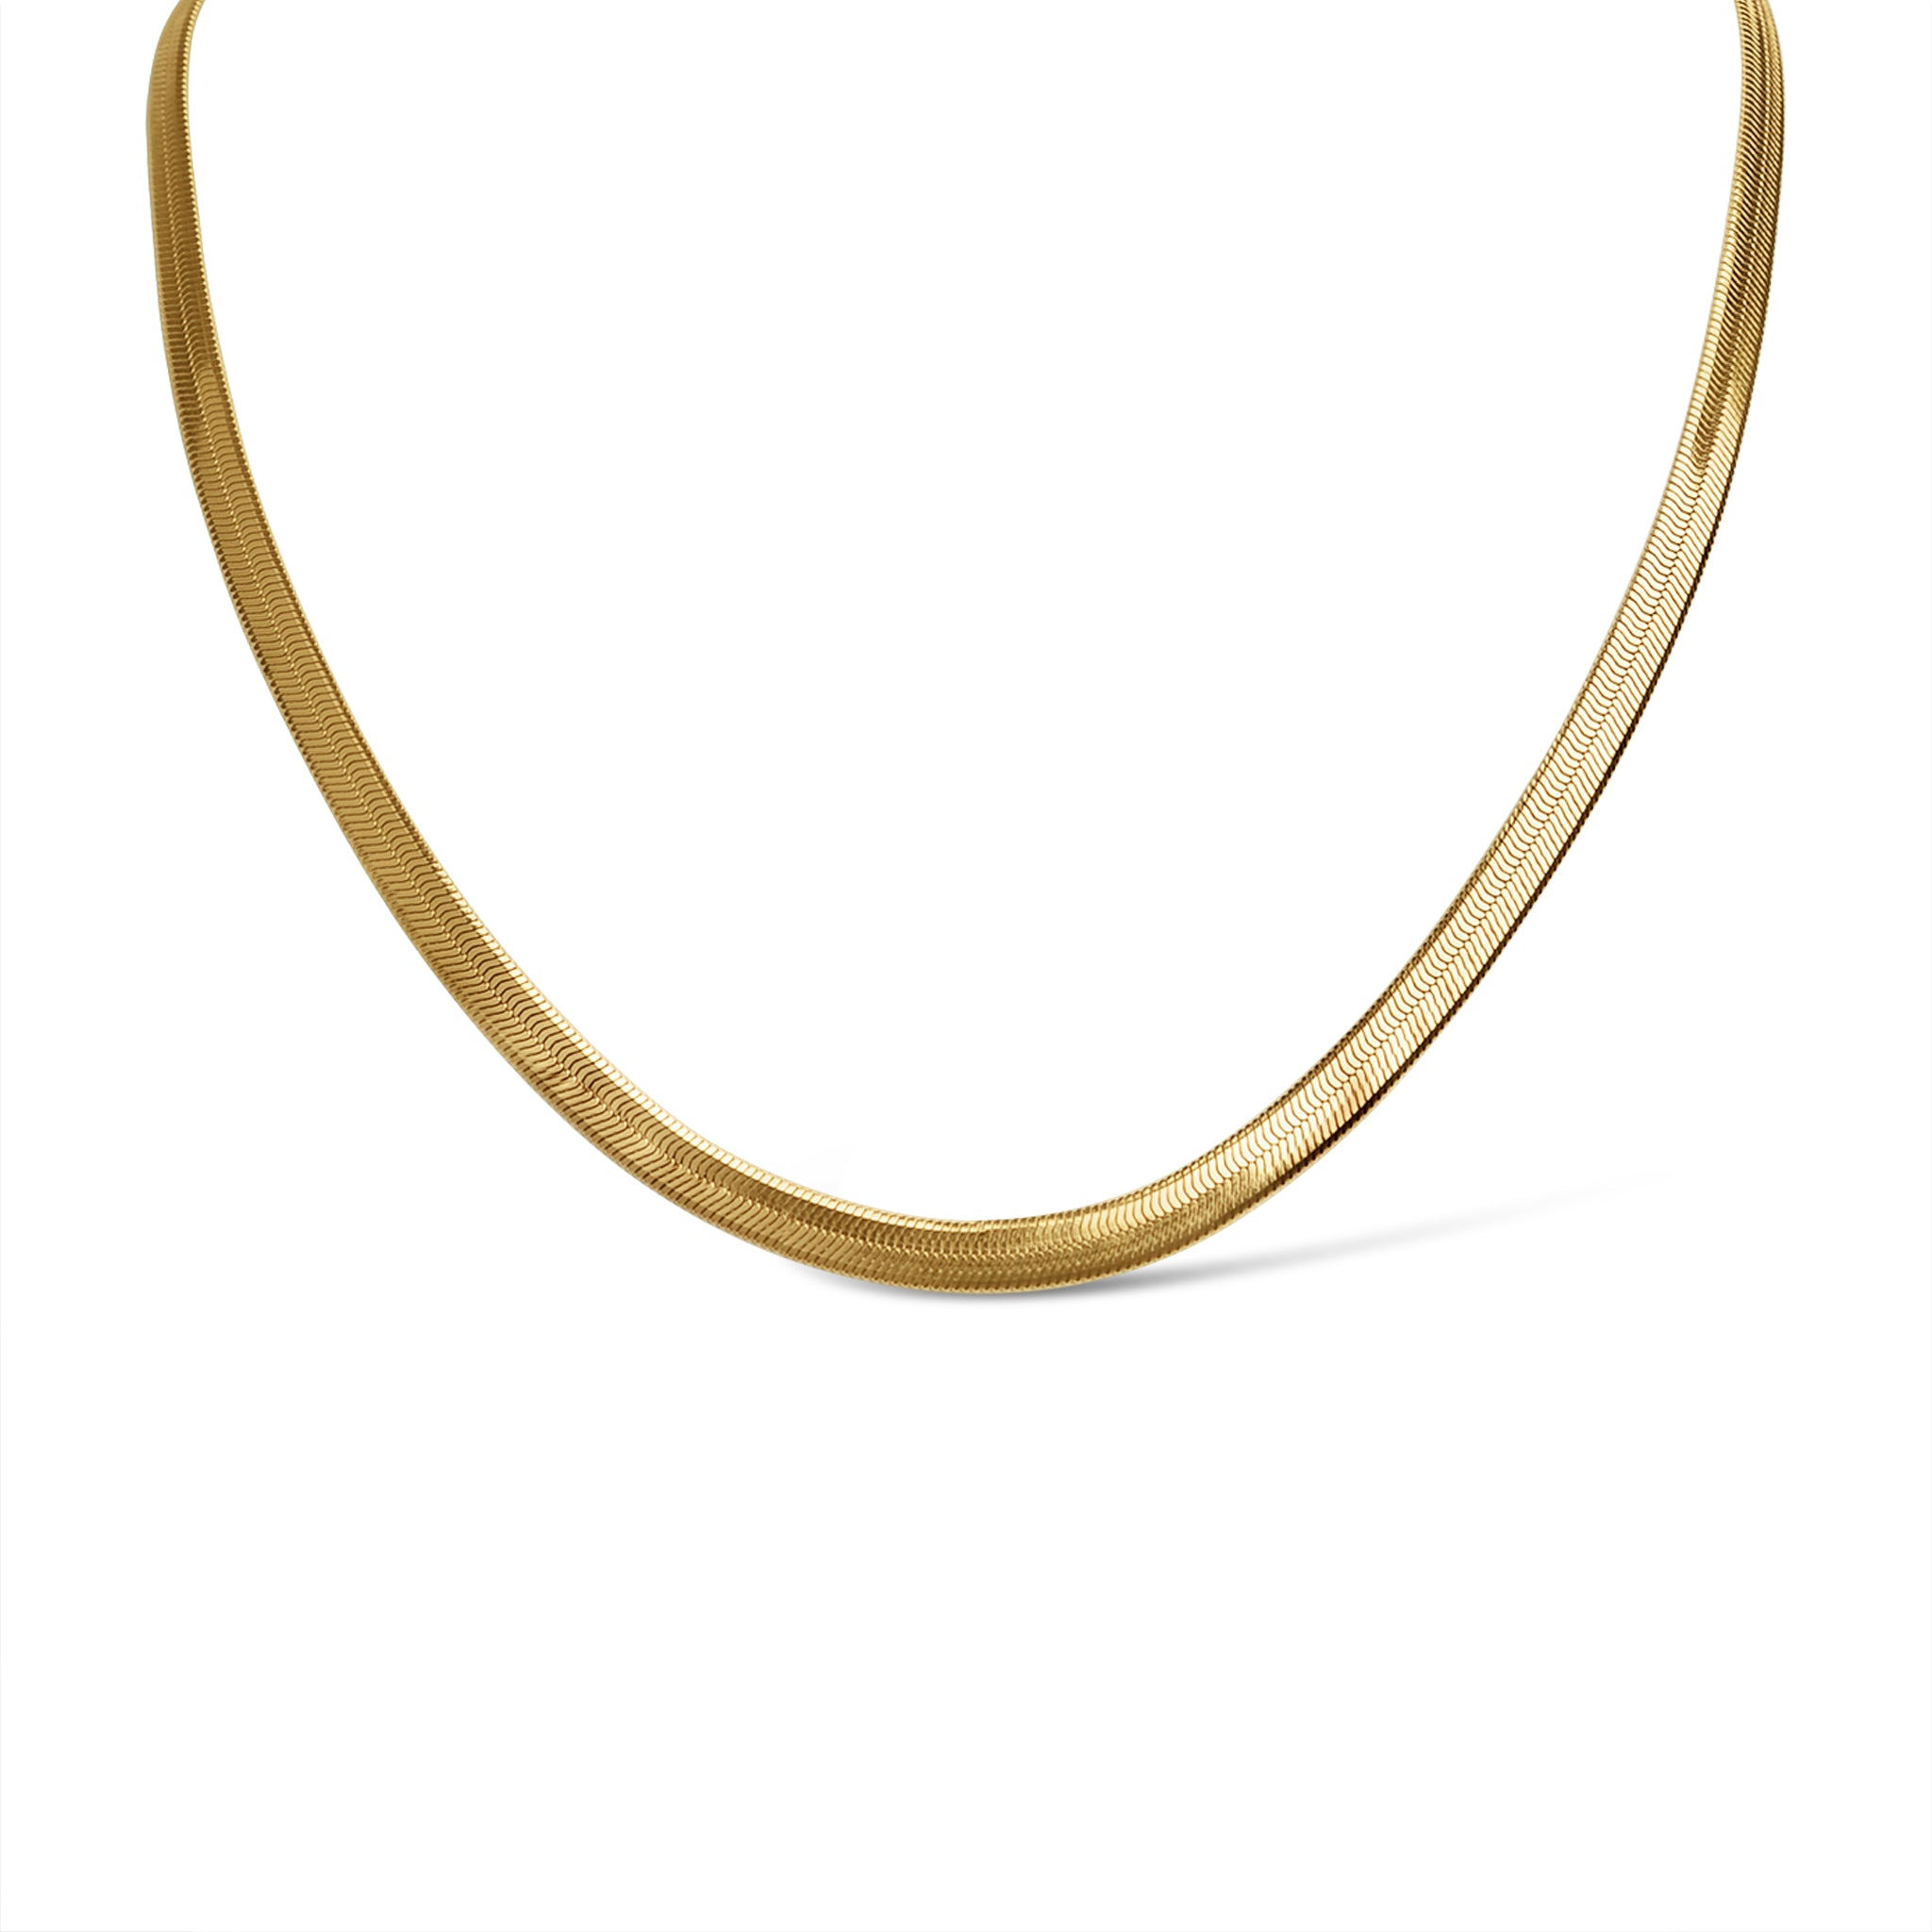 18K Yellow Gold Over Sterling Silver Reversible Diamond Cut Herringbone  Chain Link Necklace - DOM409A | JTV.com